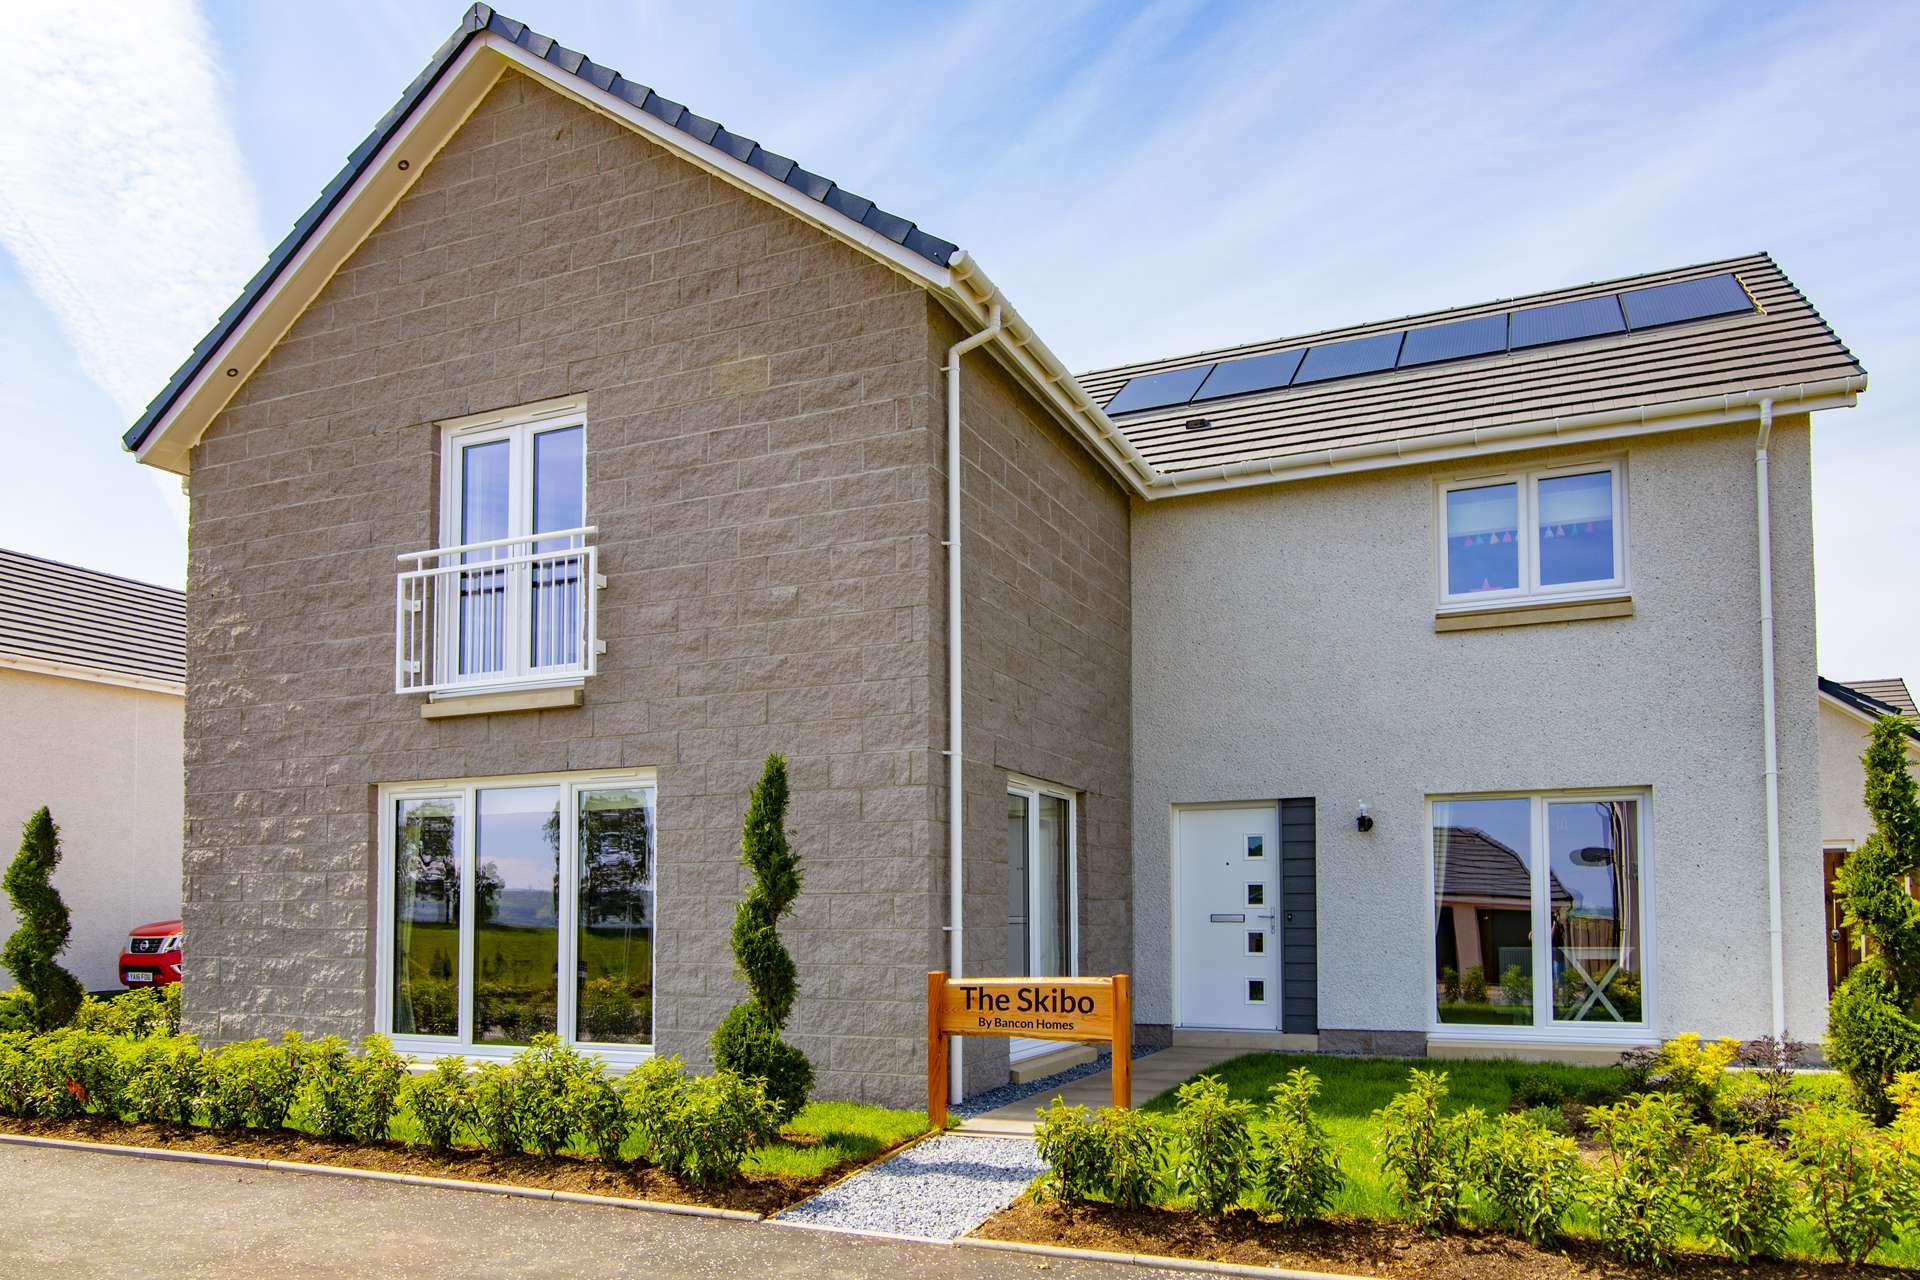 Bancon Homes secures planning permission for next phase at Strathaven